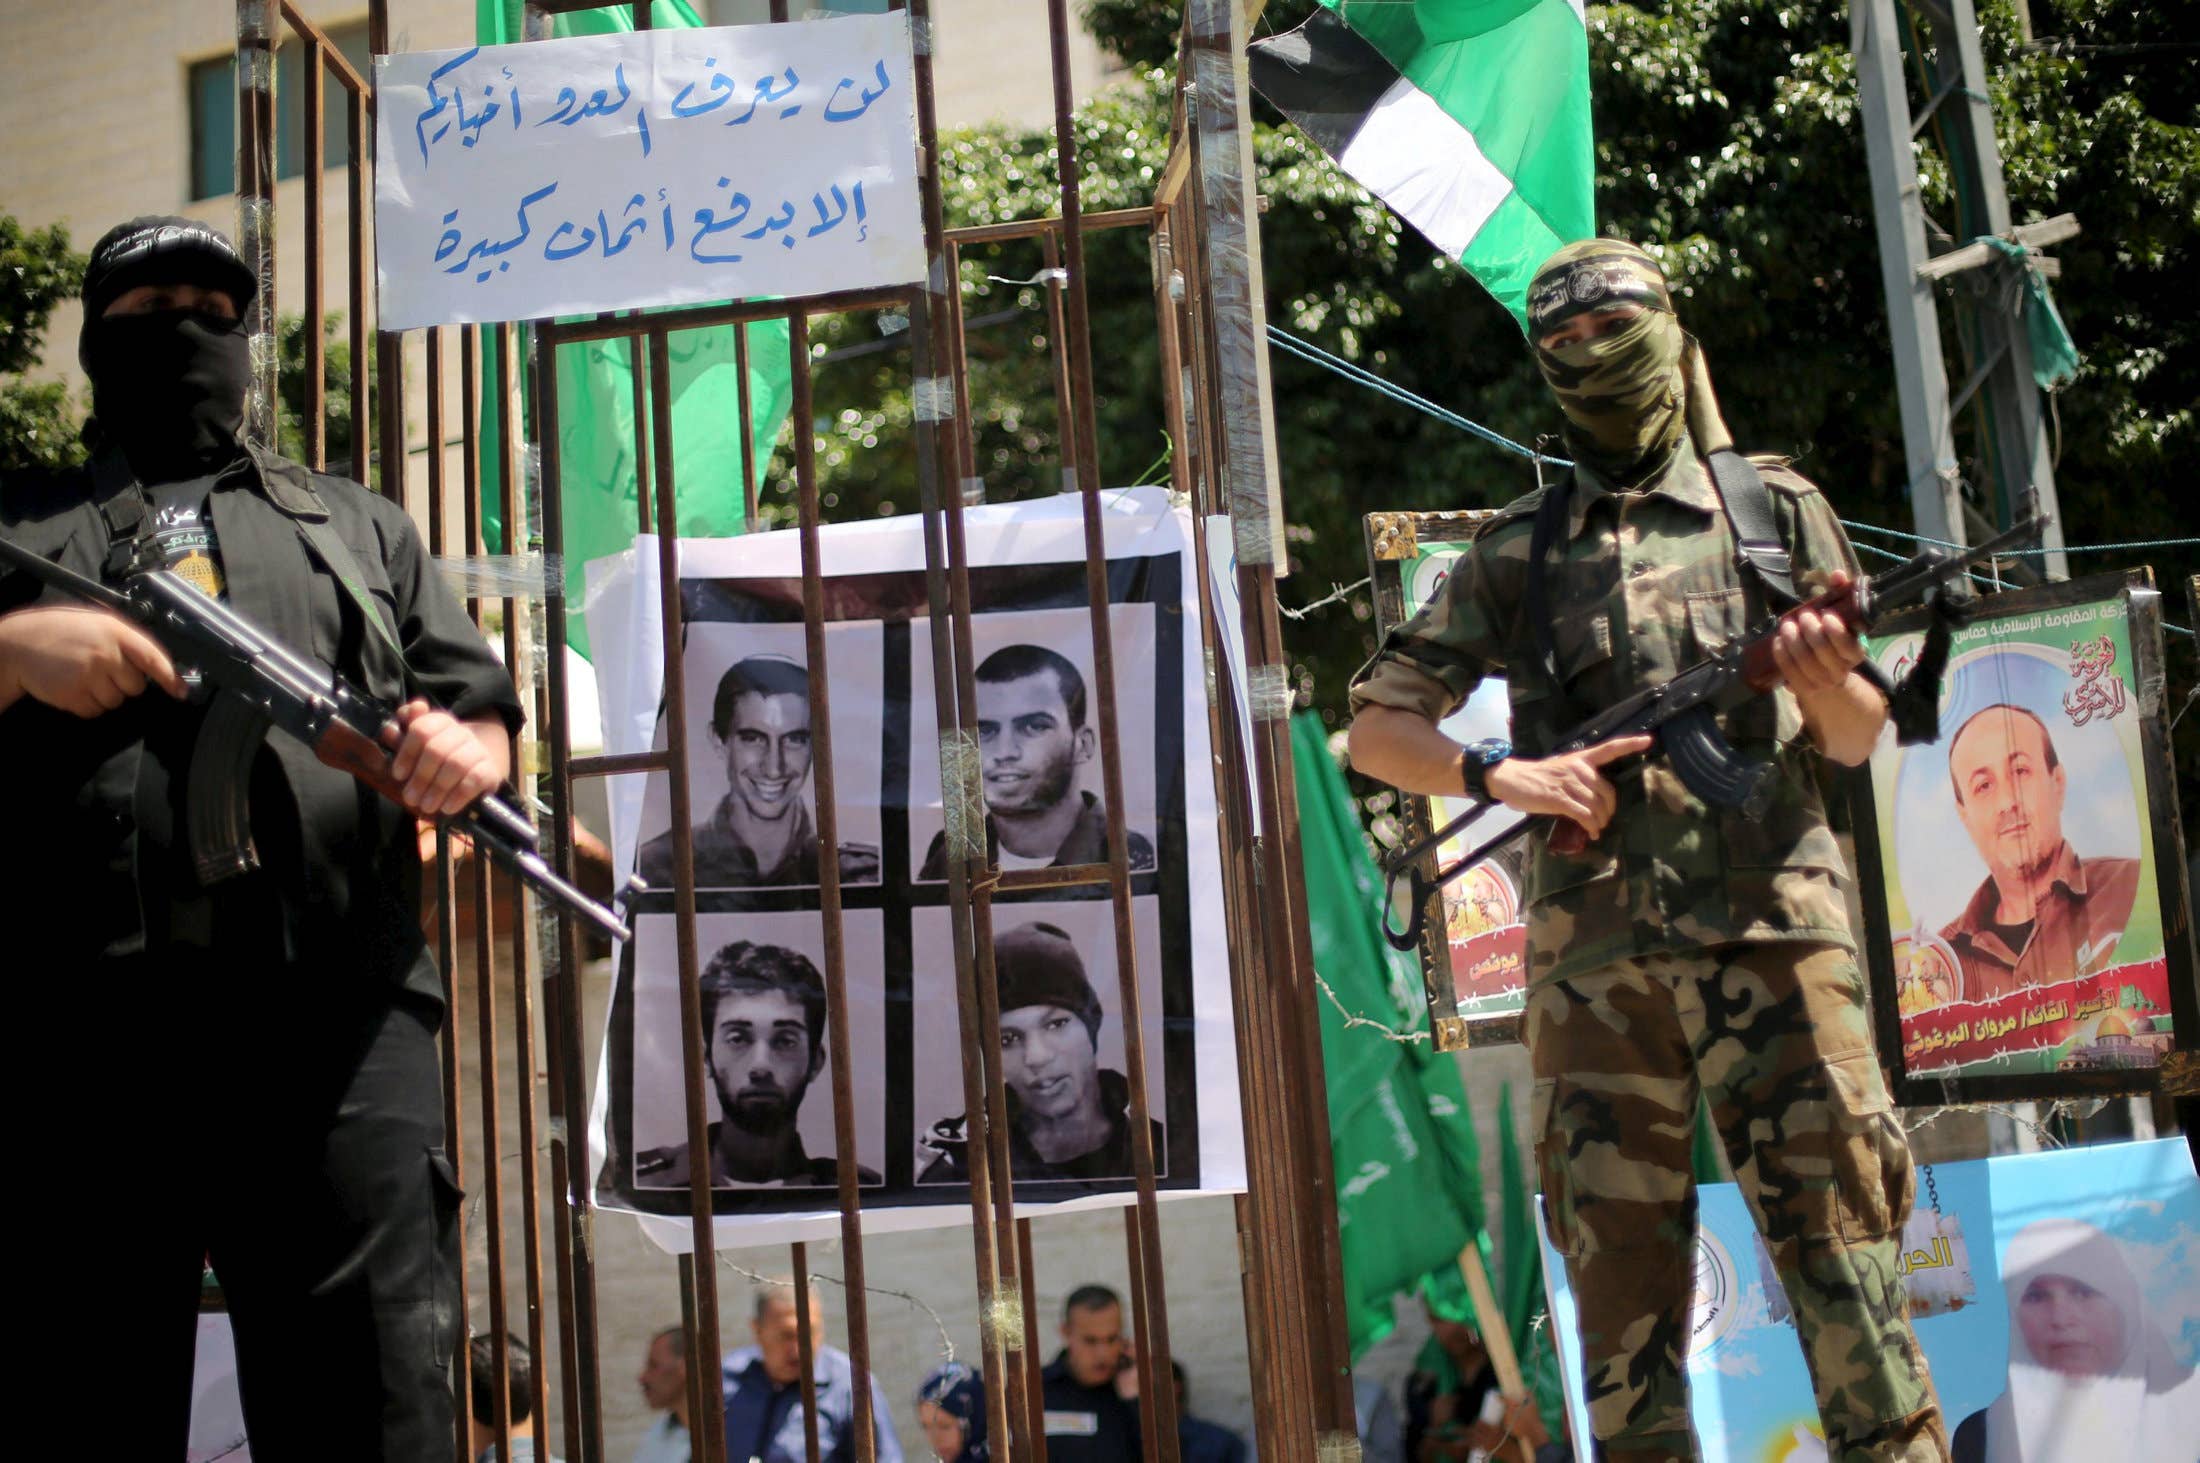 Hamas Says Israeli Captives Only, To Be Exchanged For Palestinian Prisoners